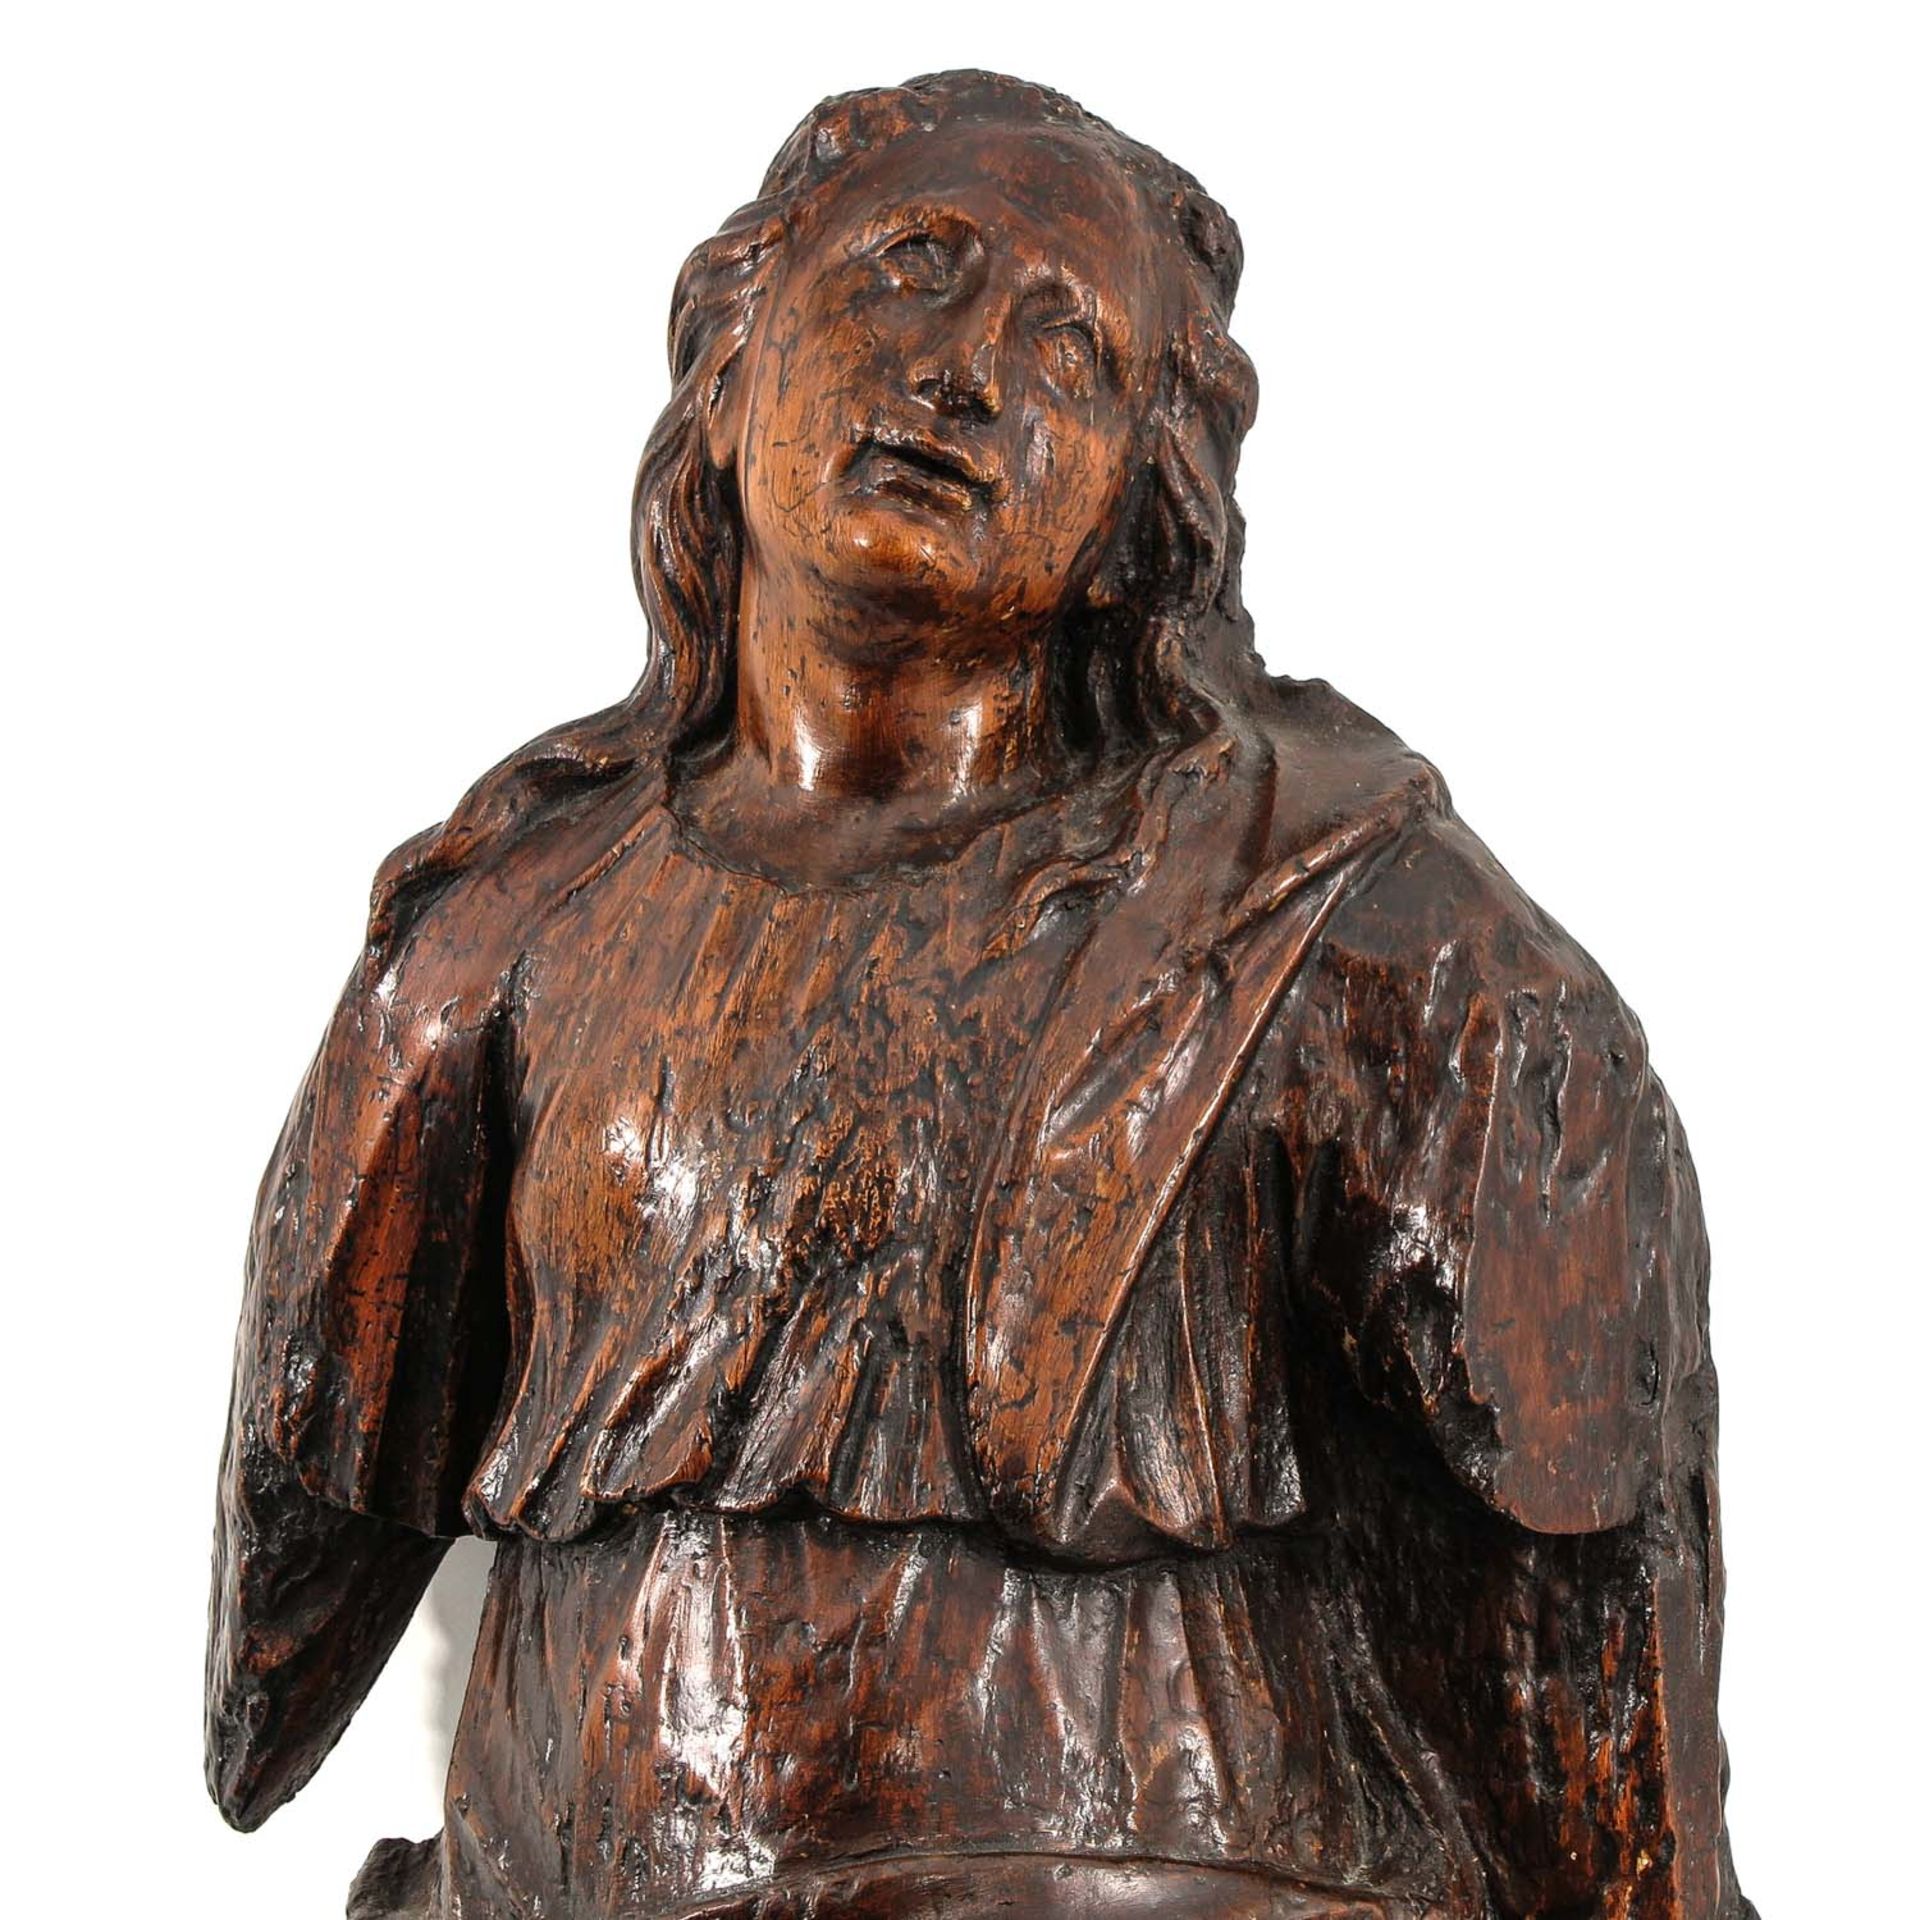 A 16th - 17th Century Religious Sculpture - Image 3 of 8